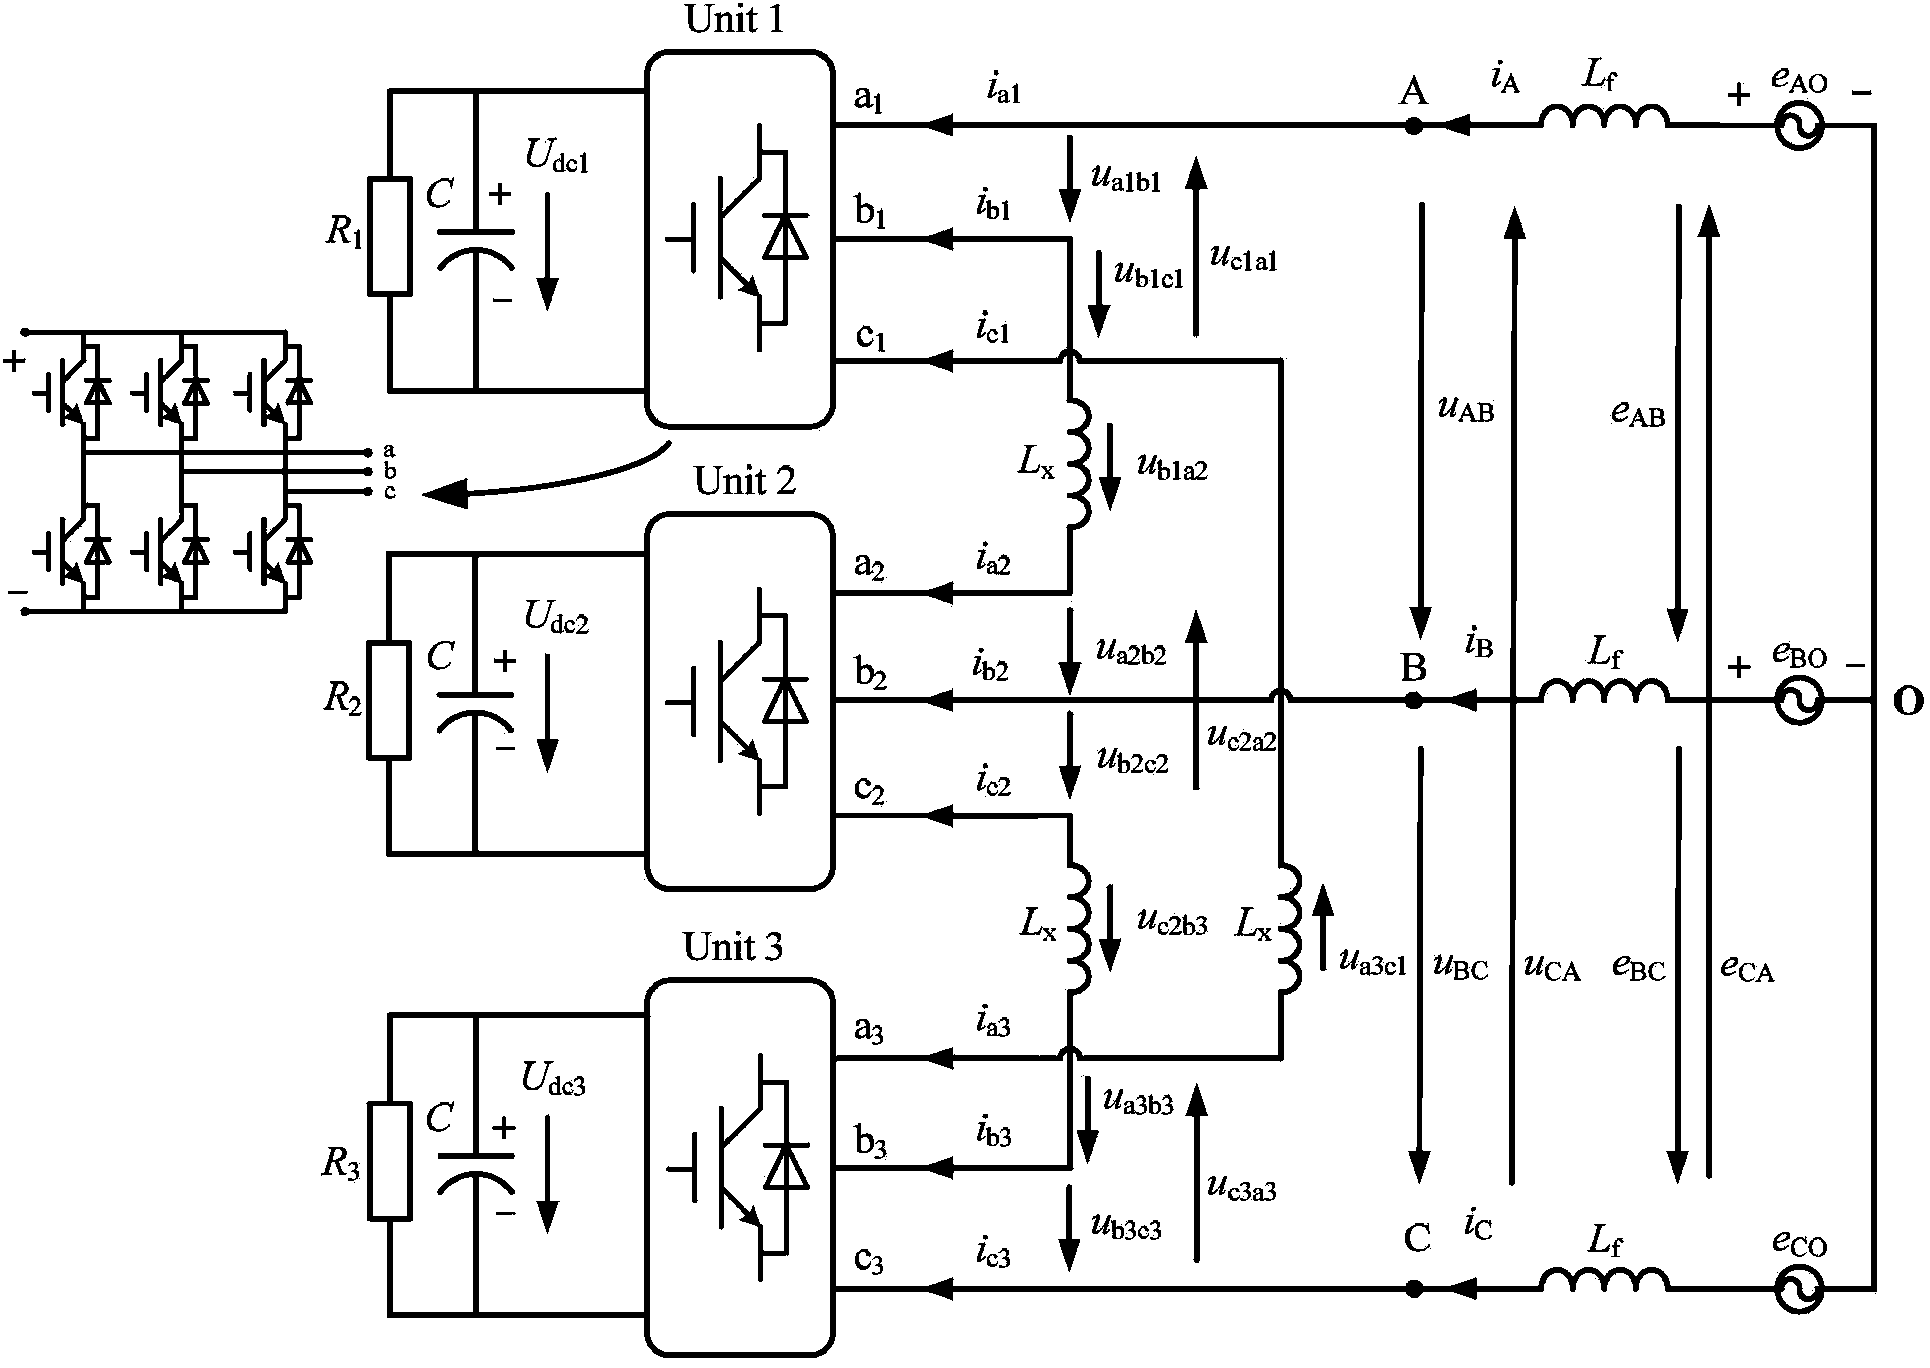 Method for controlling triple line-voltage cascaded (LVC) converter based on equivalent circuit model